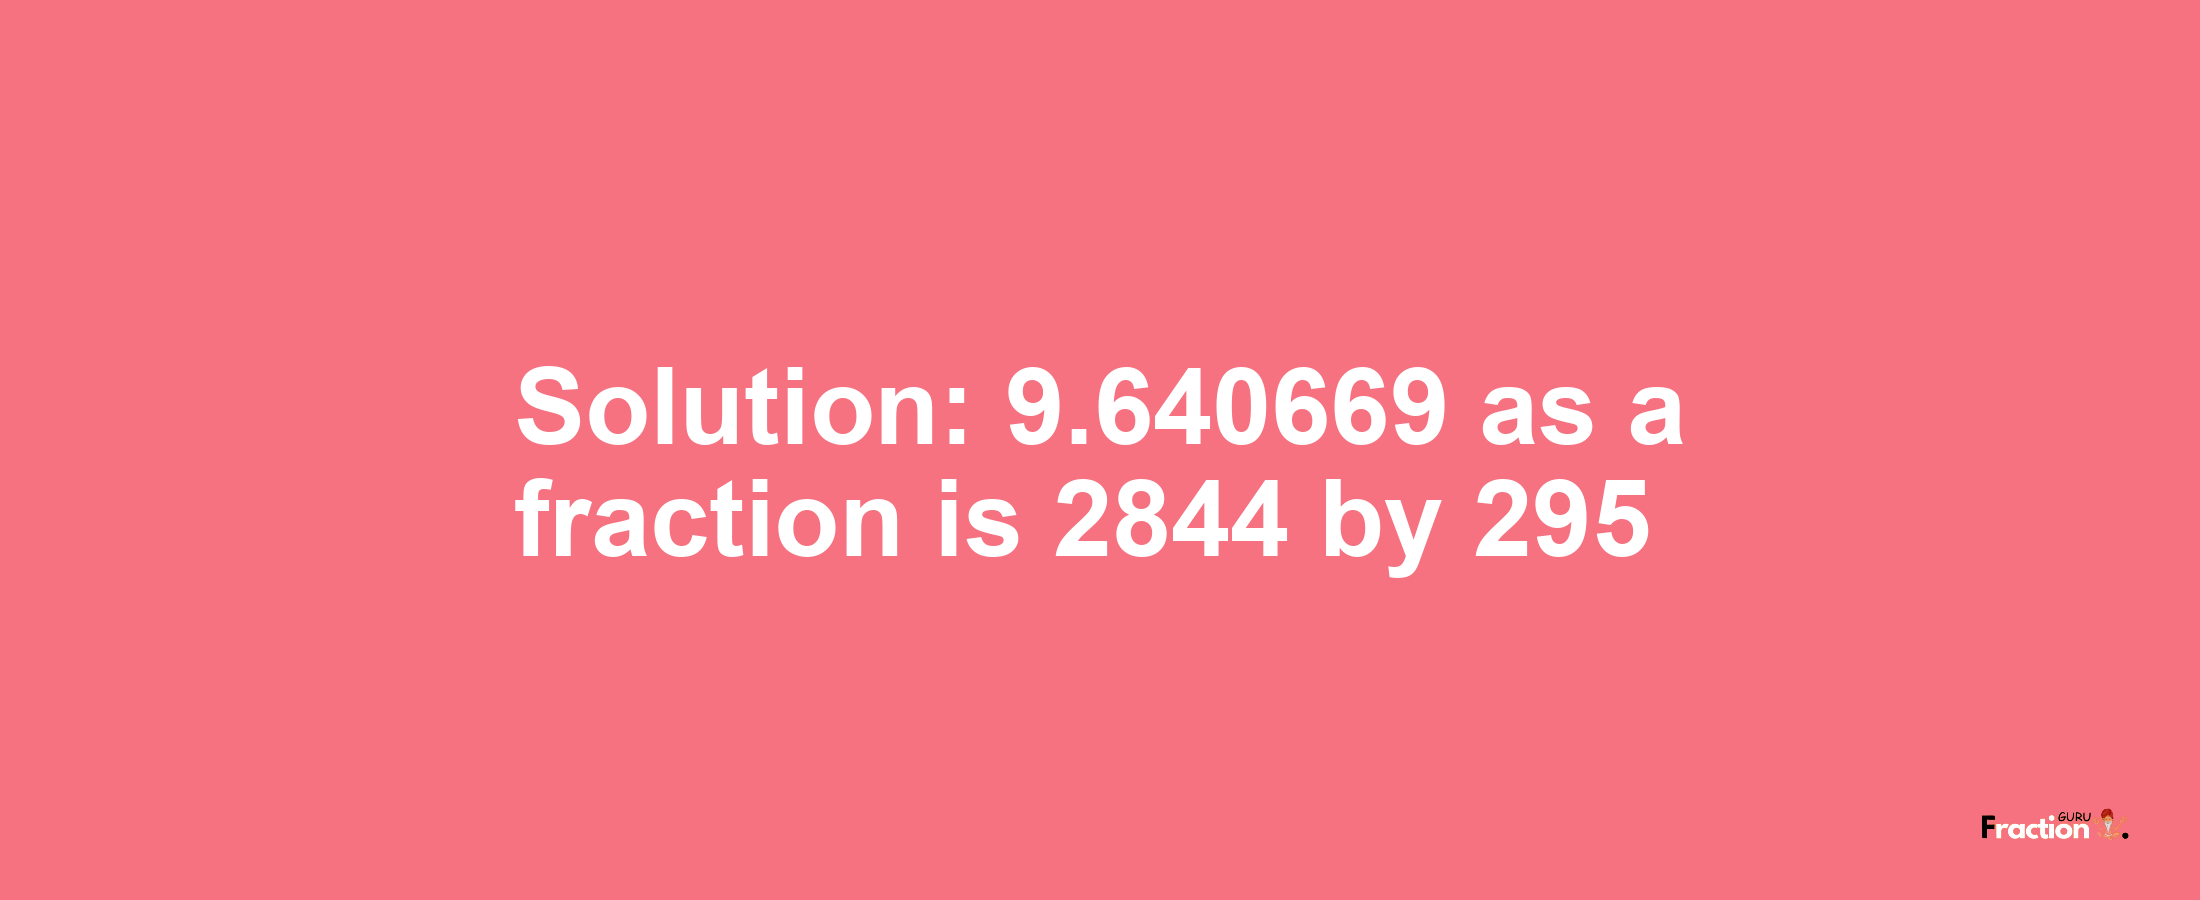 Solution:9.640669 as a fraction is 2844/295